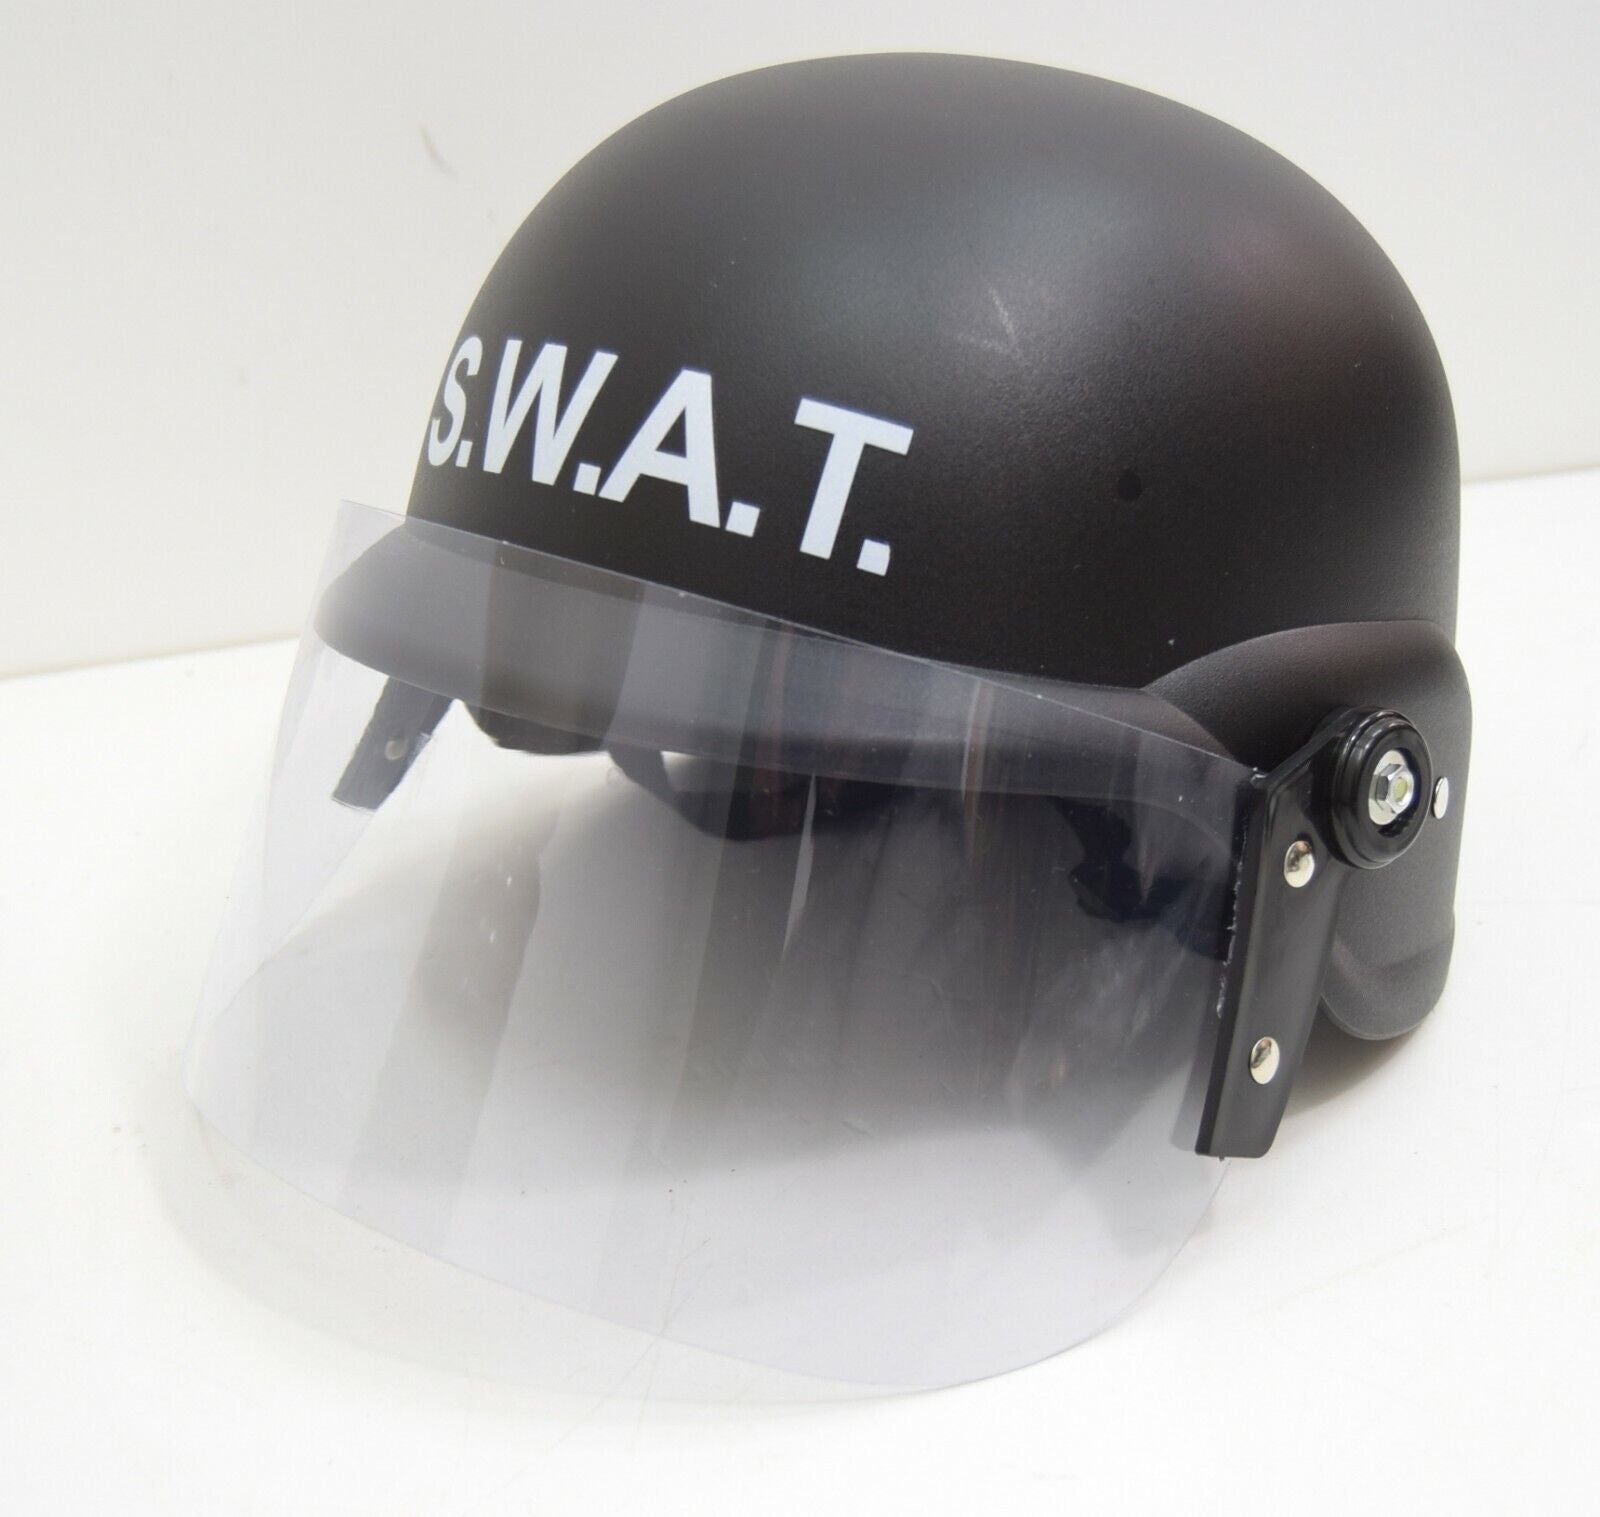 SWAT Style PASGT Plastic Helmet With Visor US Military Police Repro Black M88 